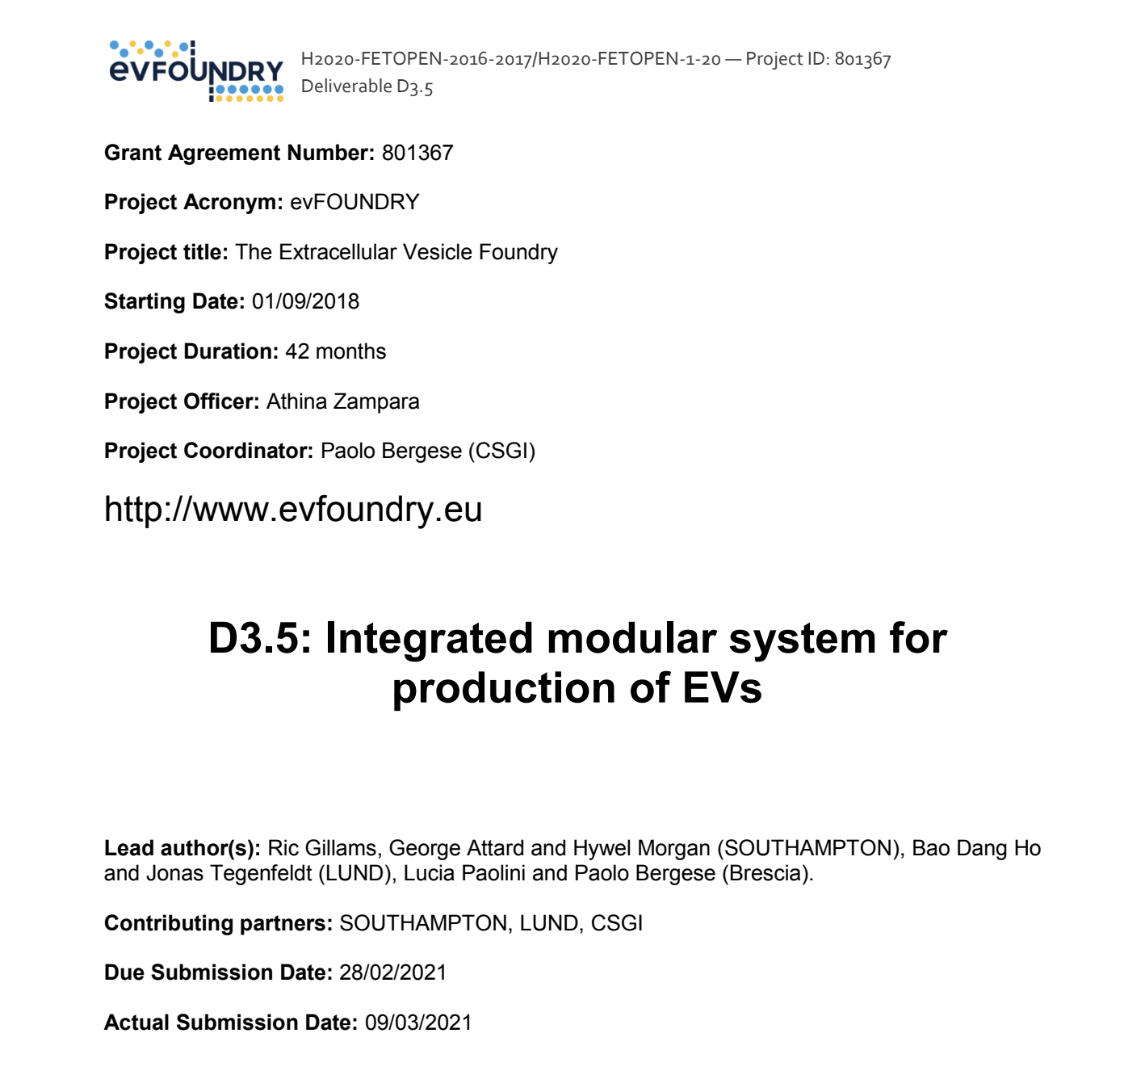 D3.5 Integrated modular system for production of EVs